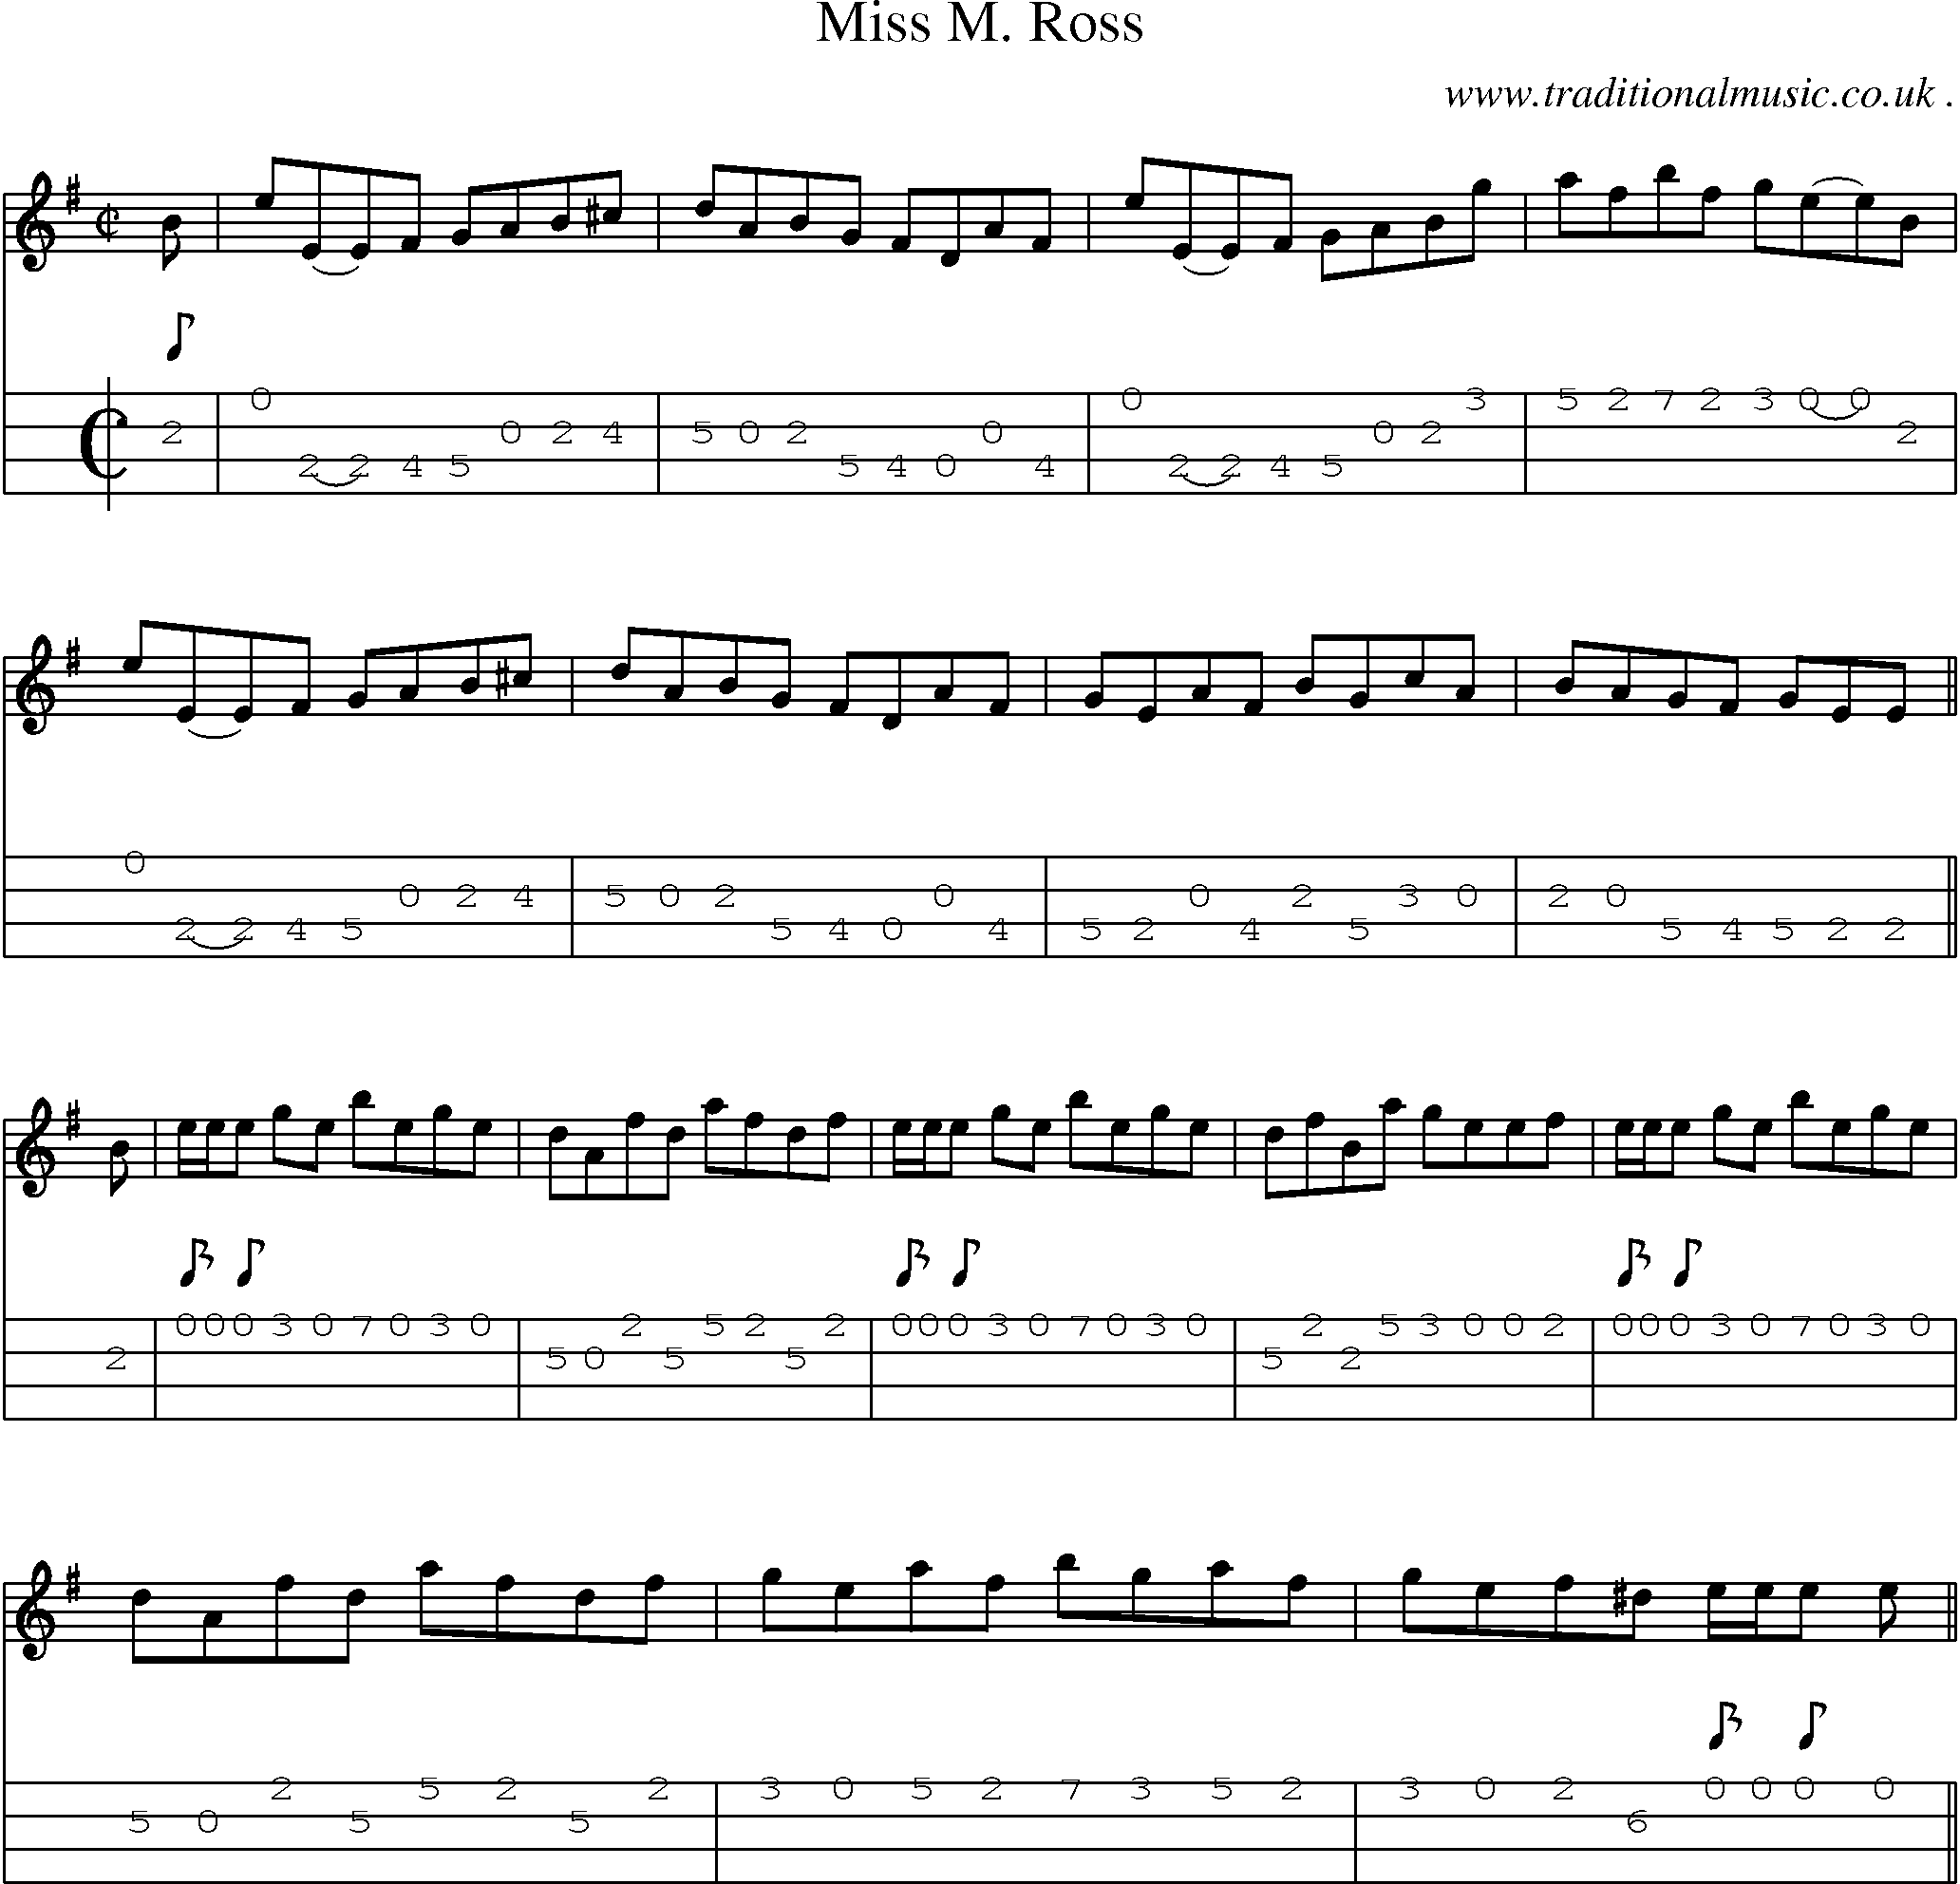 Sheet-music  score, Chords and Mandolin Tabs for Miss M Ross